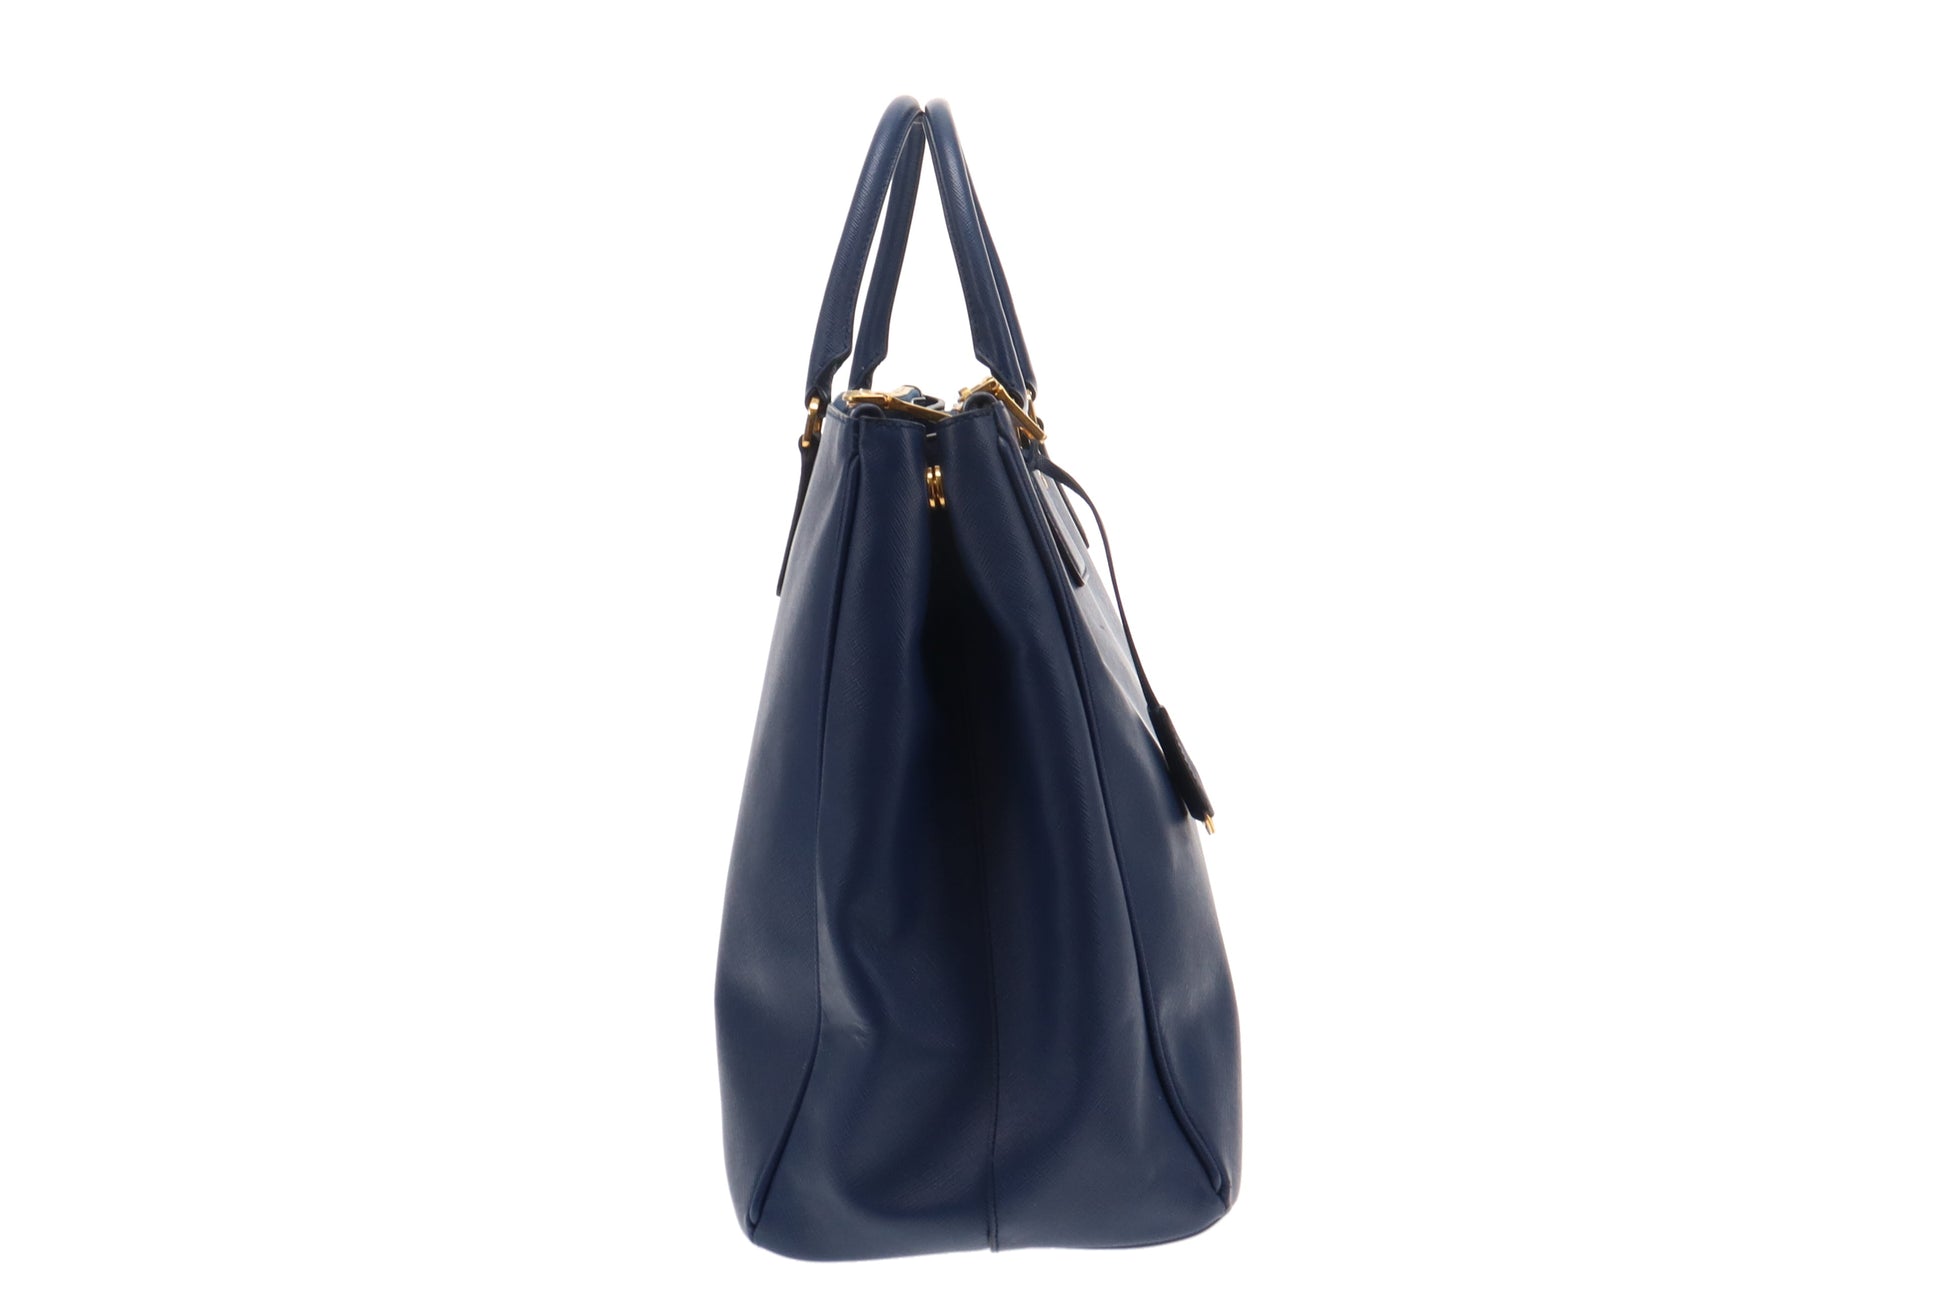 Prada Two-Tone Saffiano Leather Large Double Zip Tote For Sale at